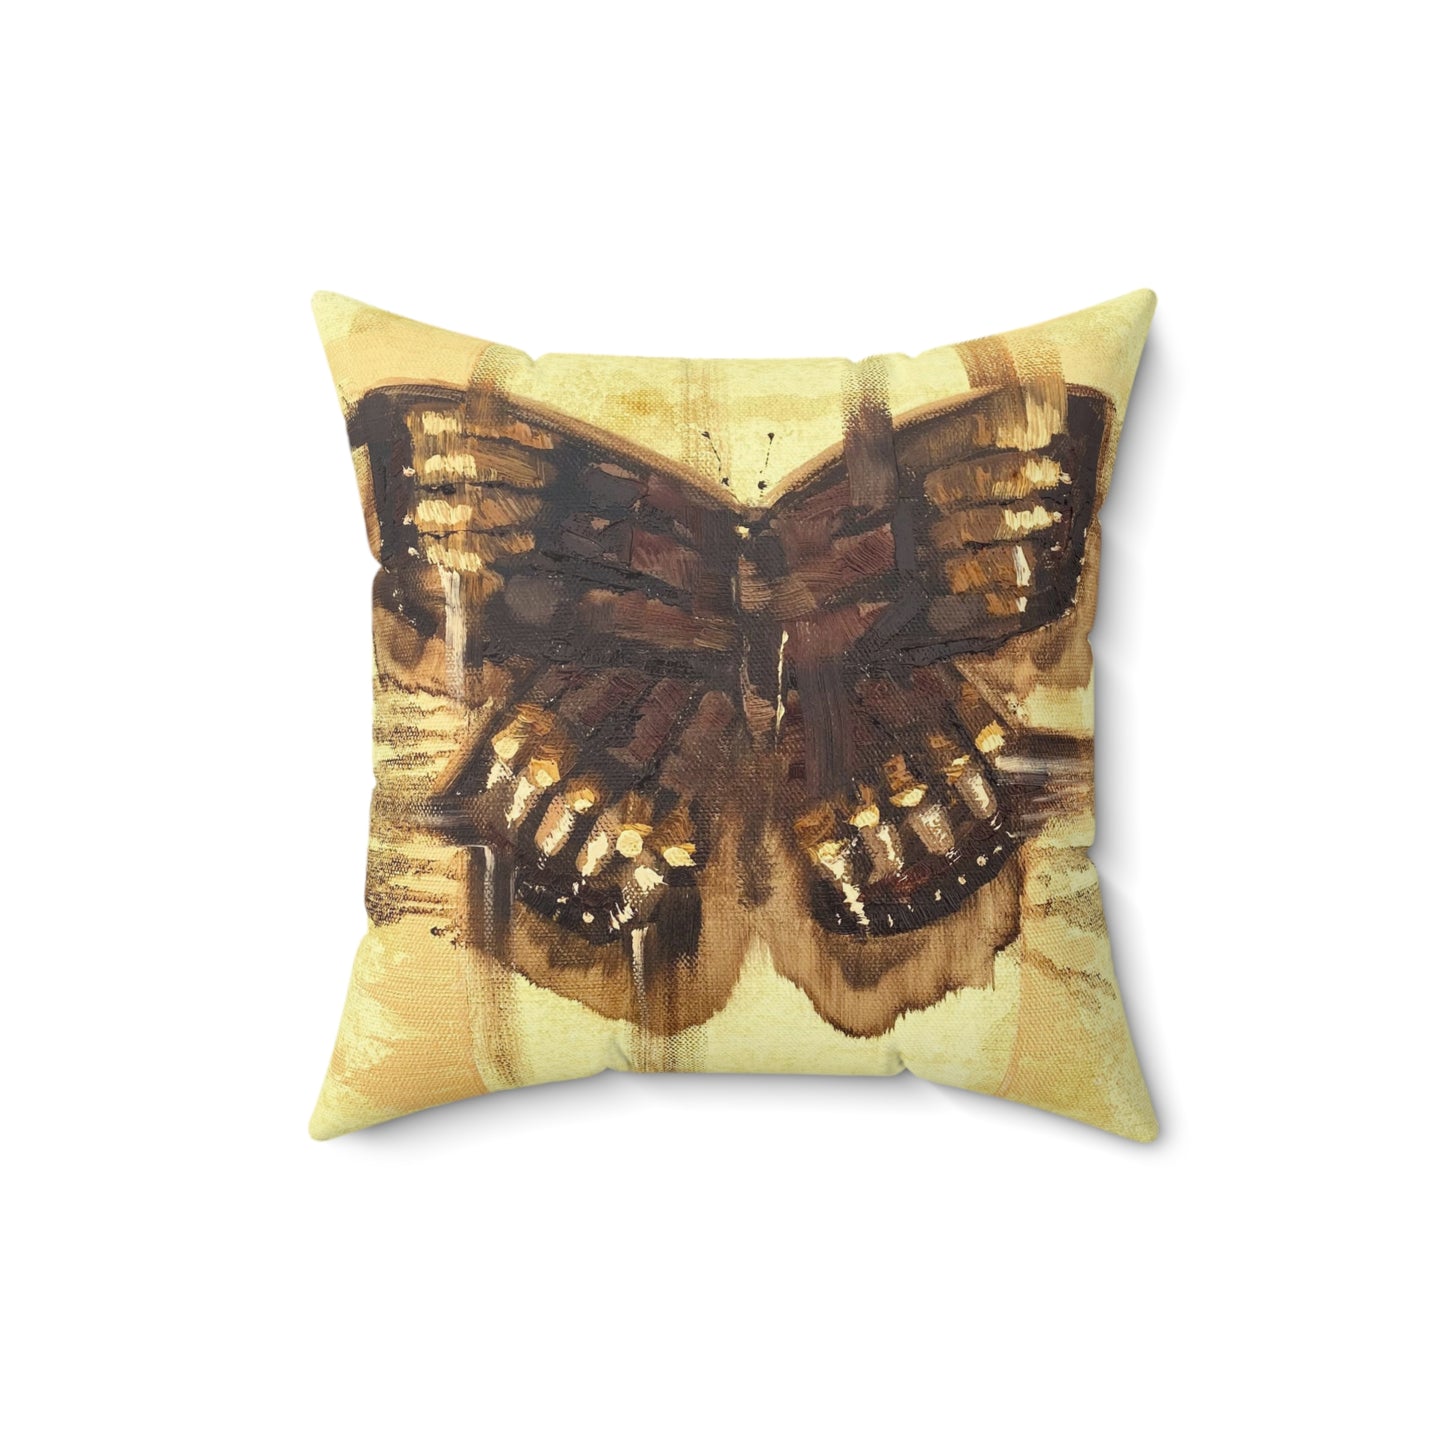 Yellow Butterfly Throw Pillow | Home Decor | Living Room Decor